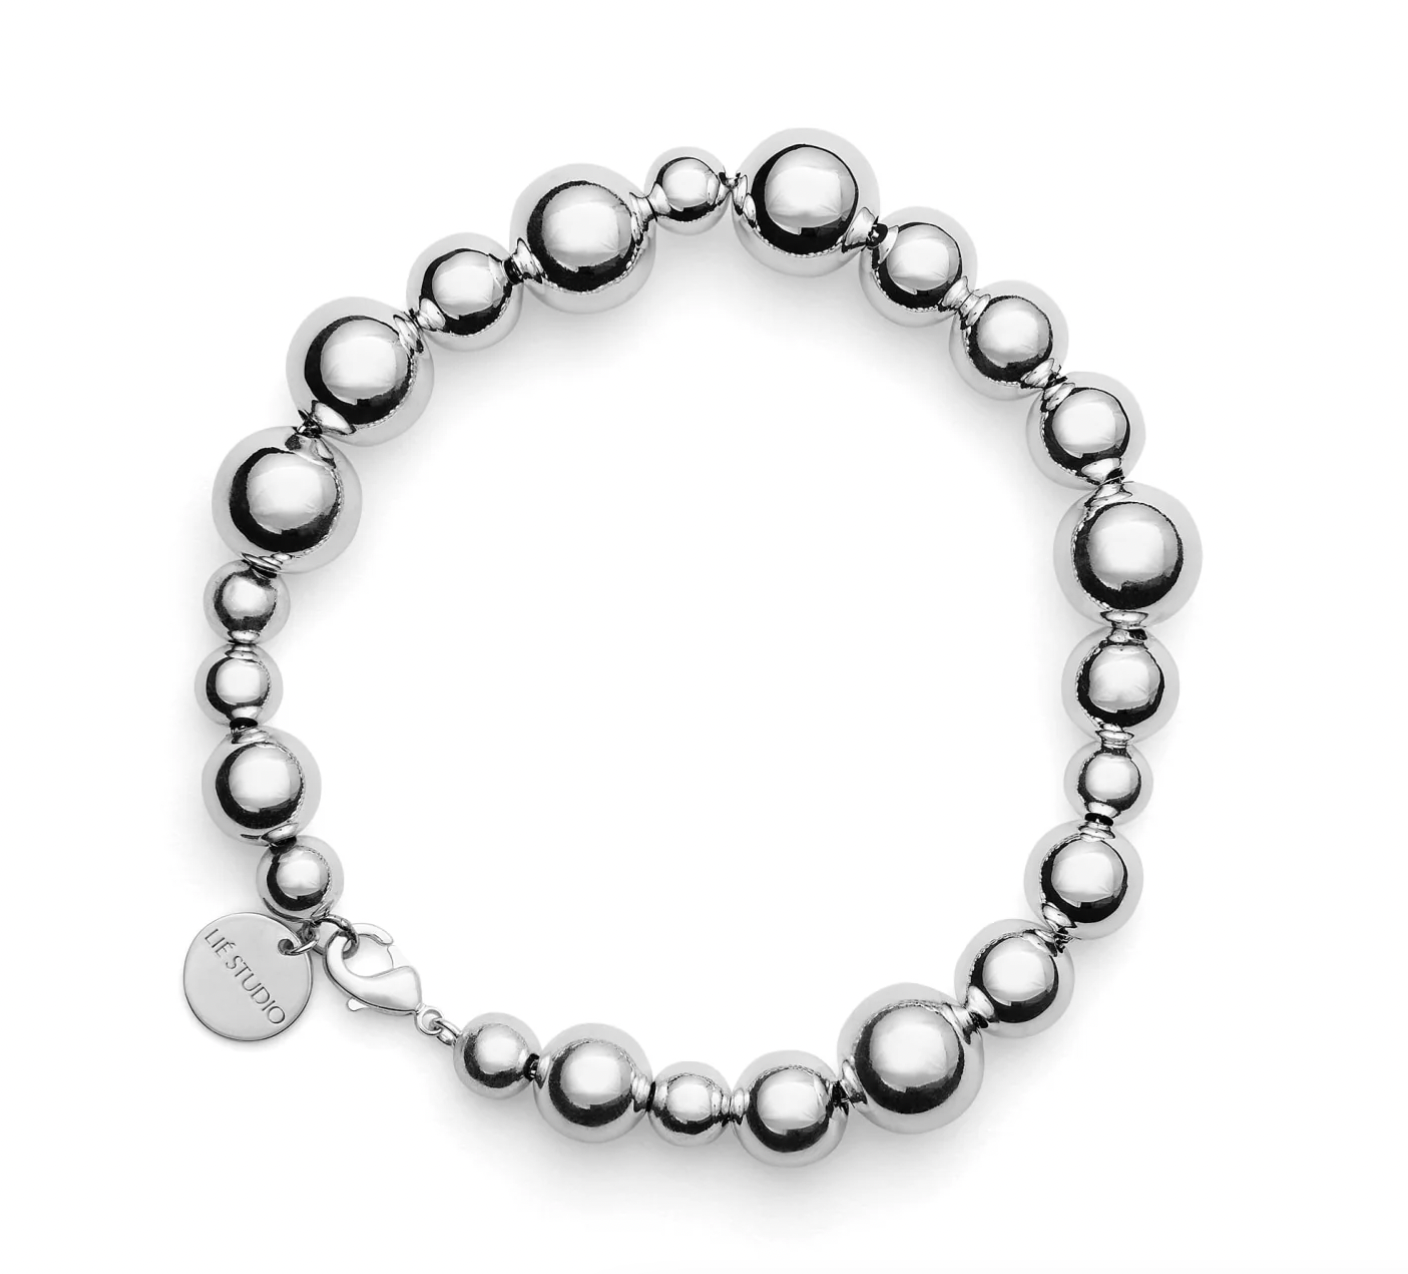 Product Image for The Elly Bracelet, Silver